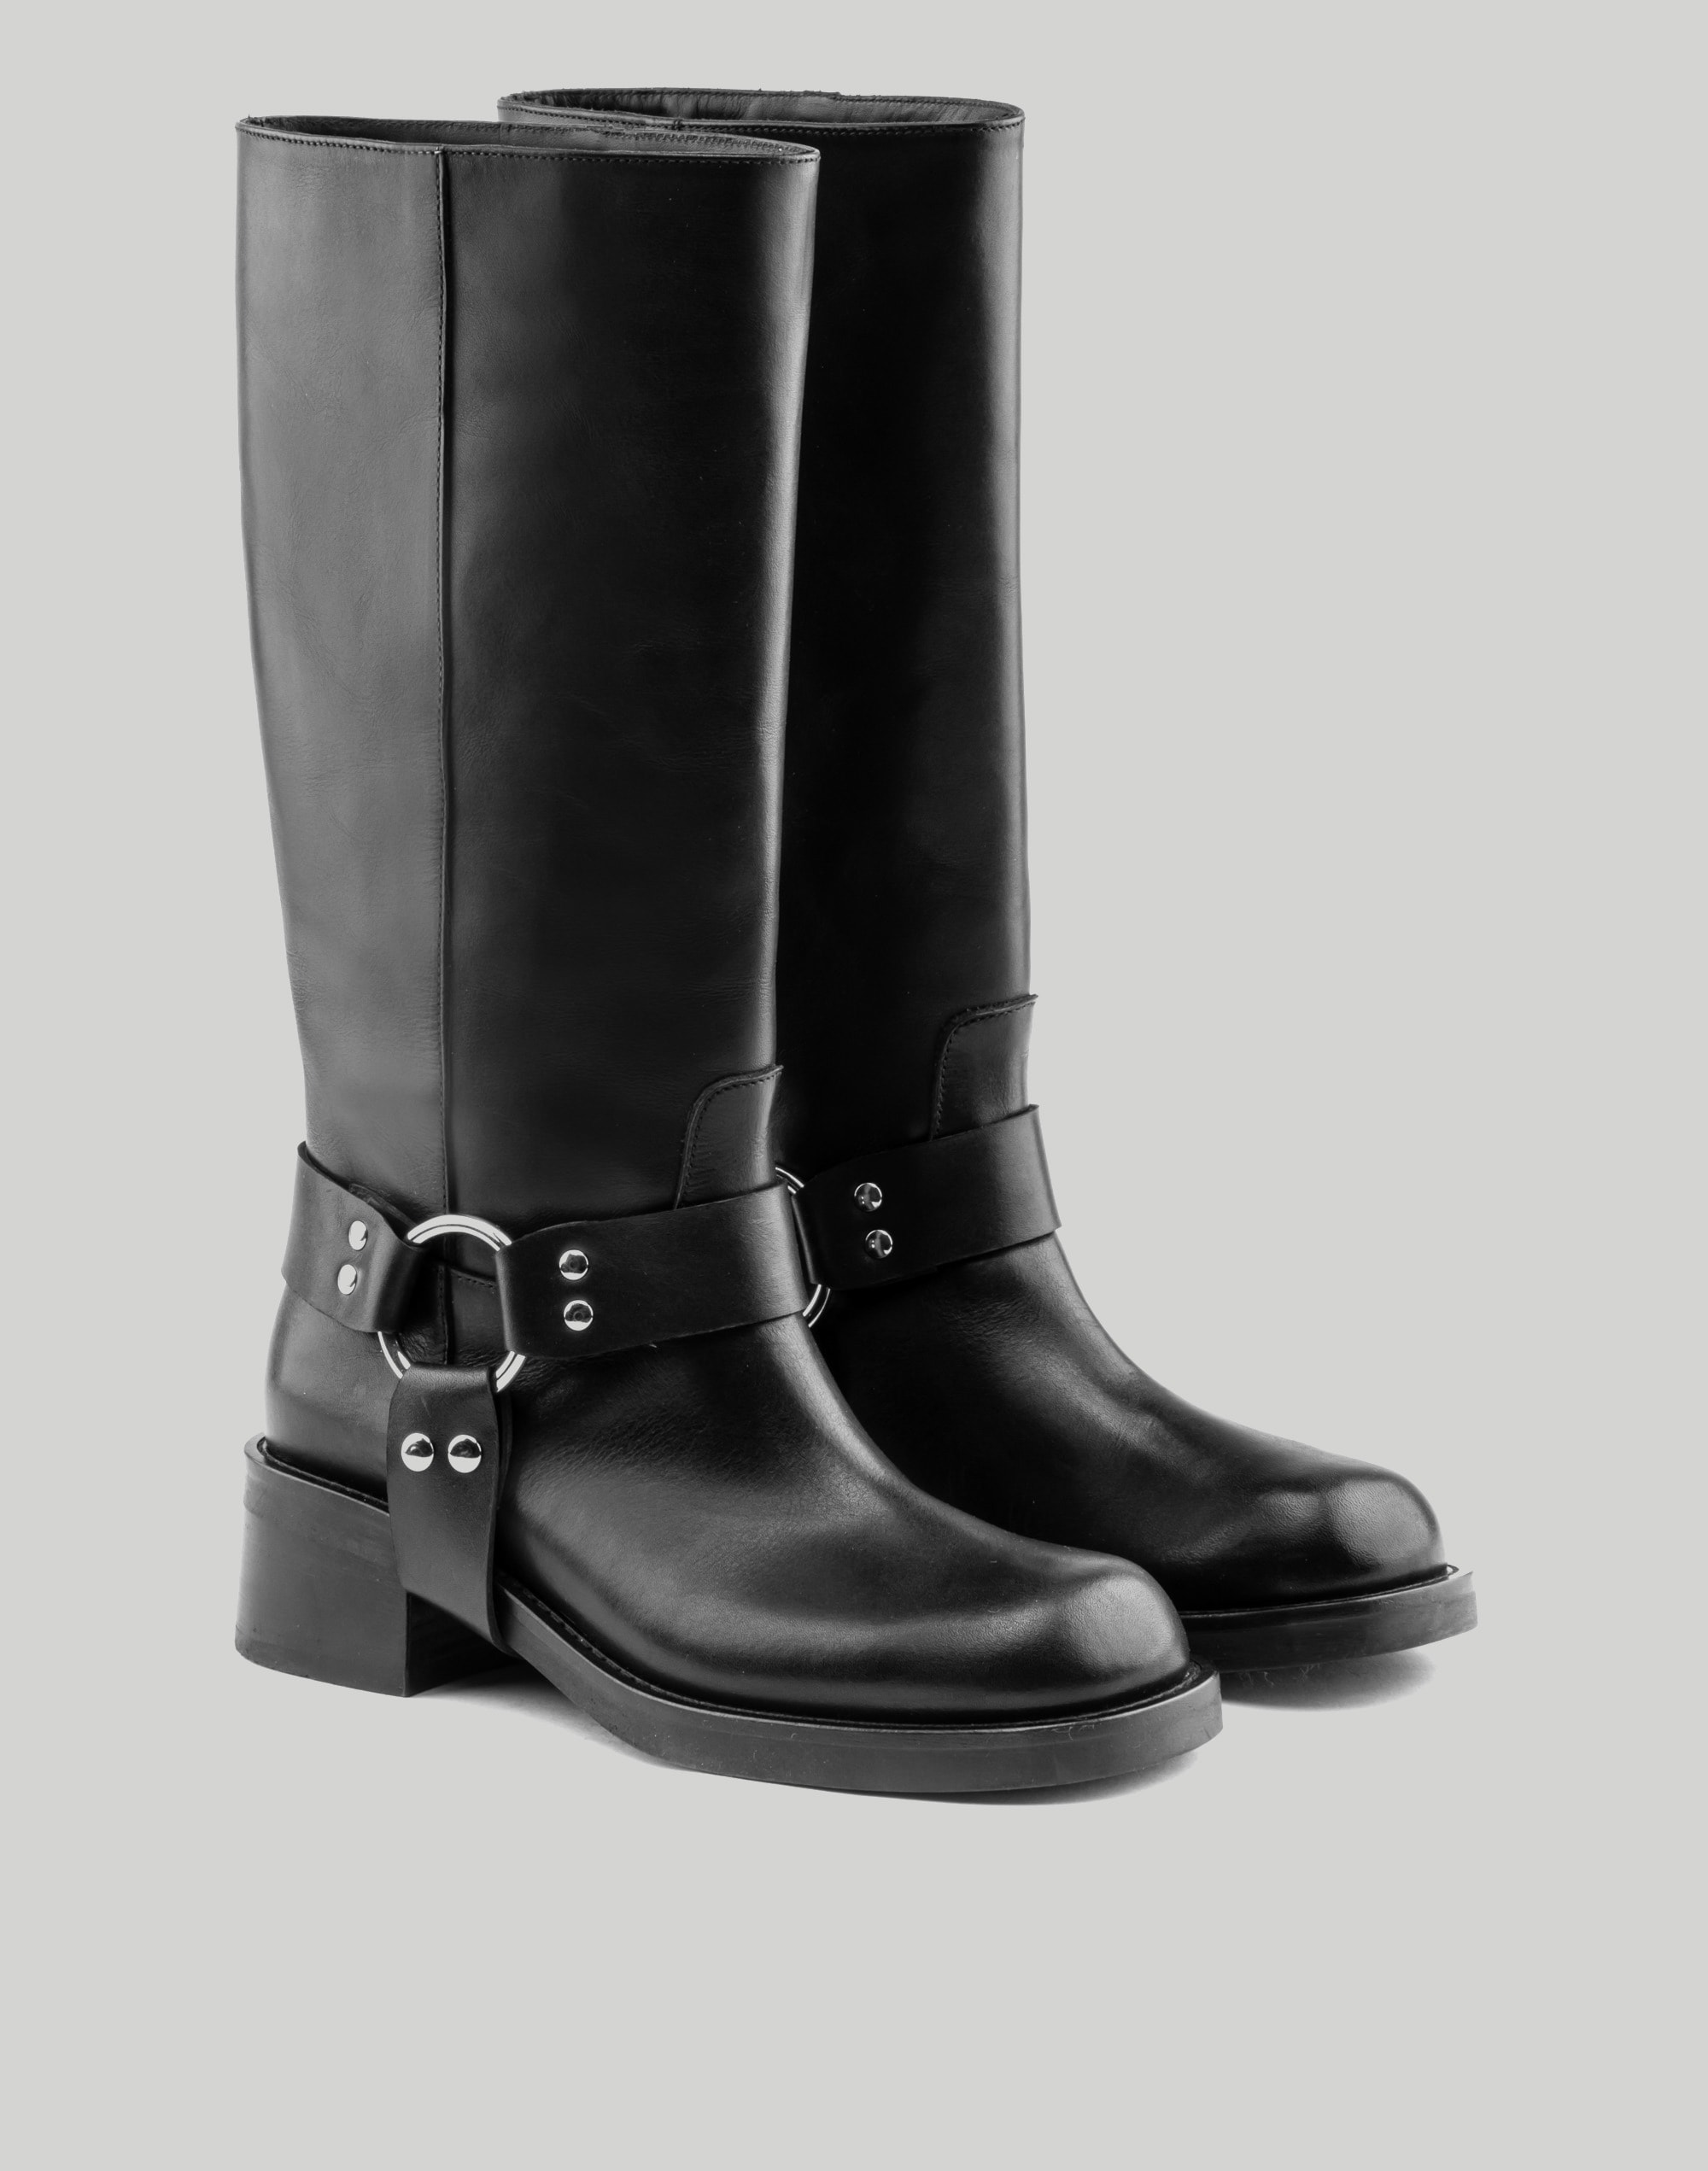 Maguire Lucca Black Boot